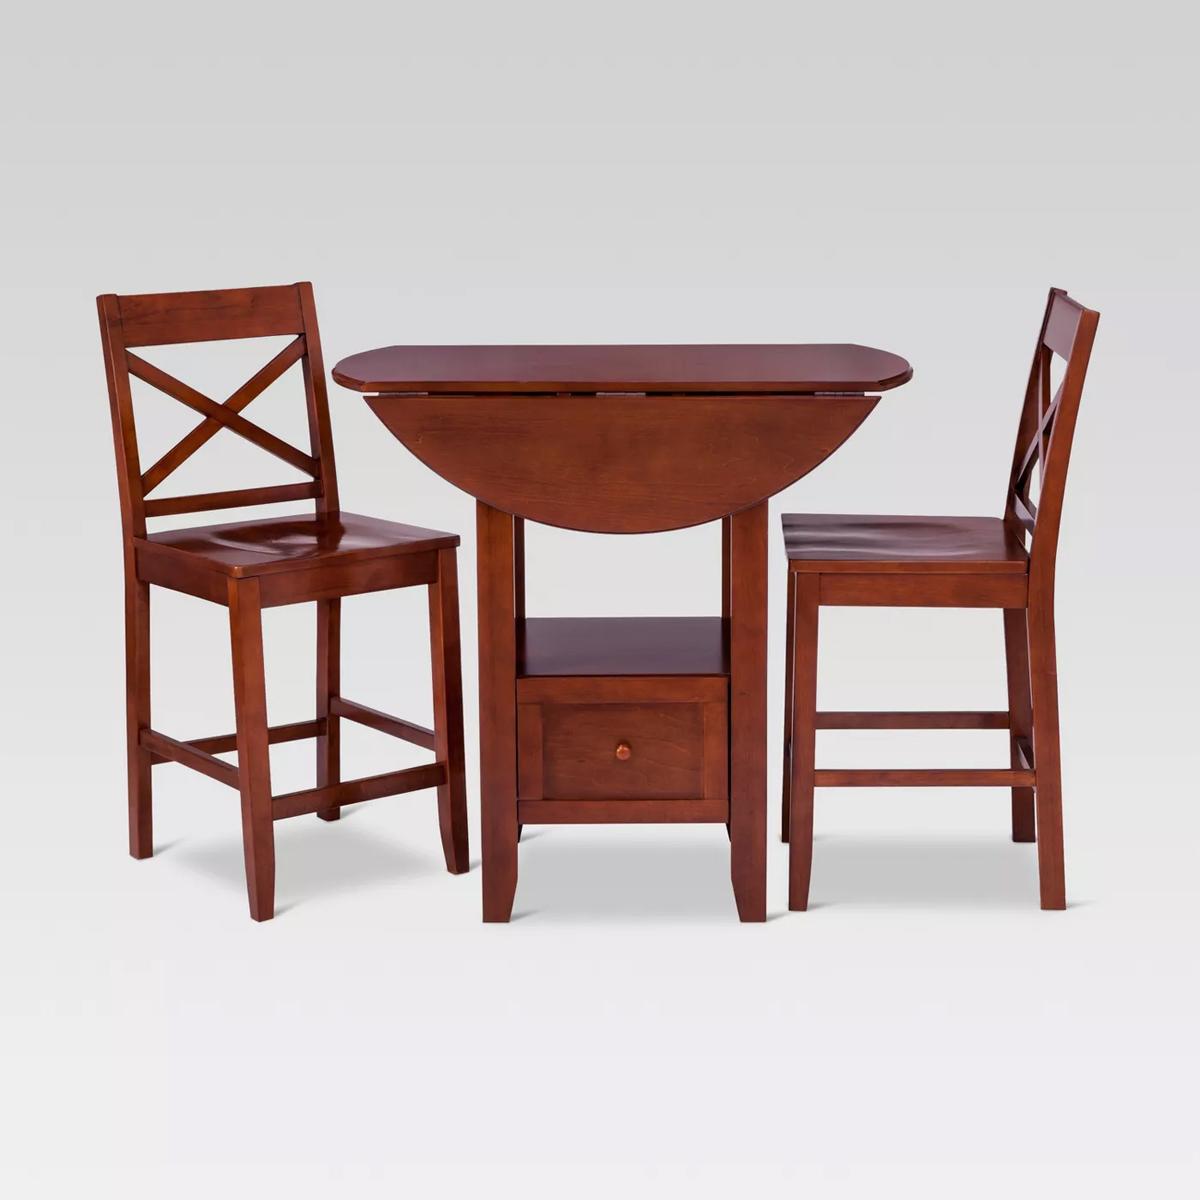 3-Piece Storage Pub Dining Table Set for $154